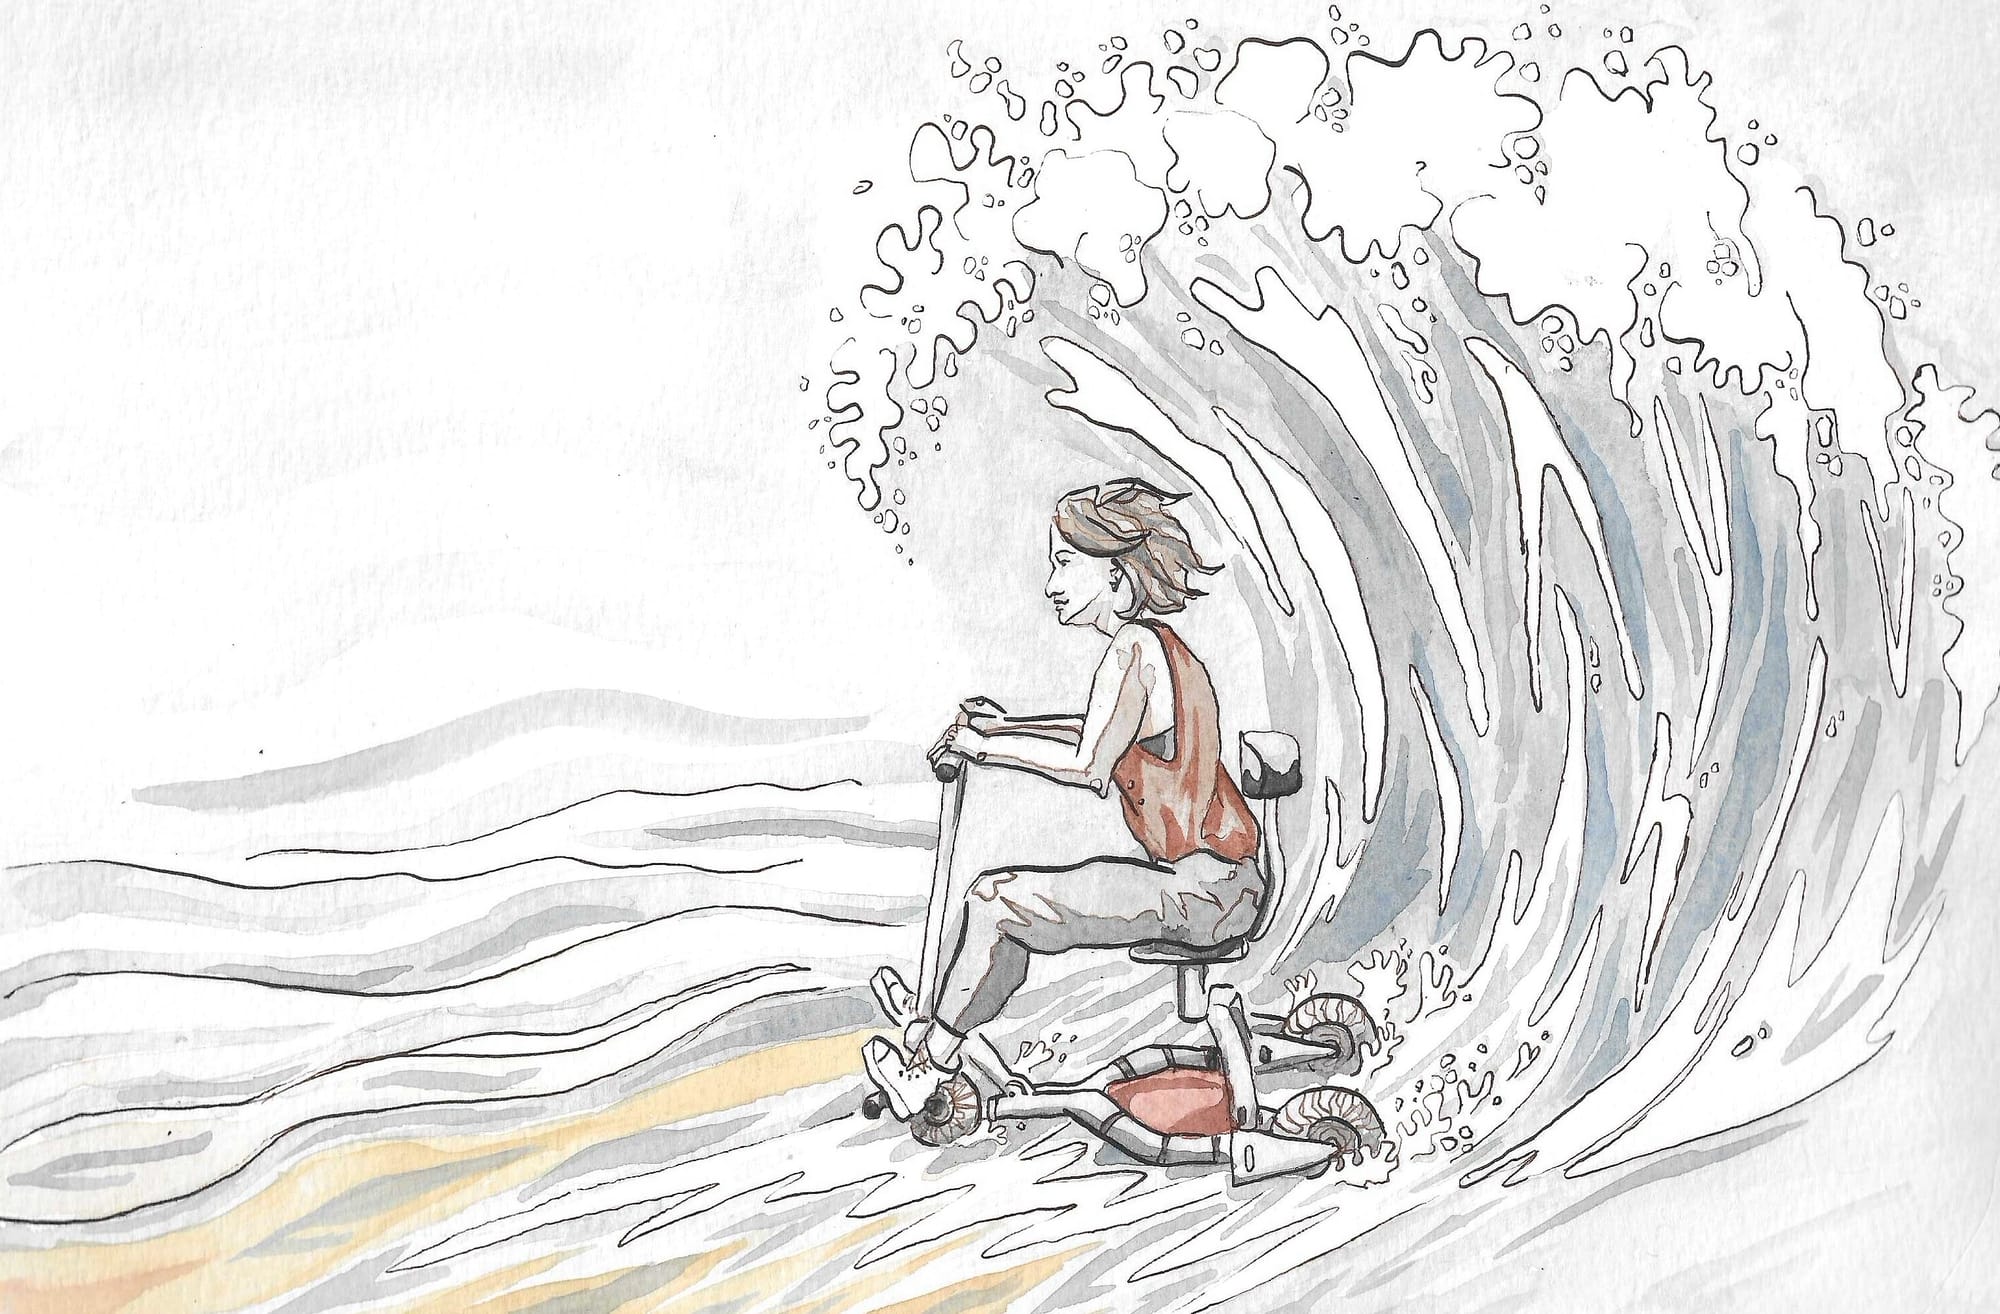 Ink and watercolour illustration of Celestine, a white woman with short, wind-swept hair, riding her three-wheeled mobility scooter through an ocean wave.